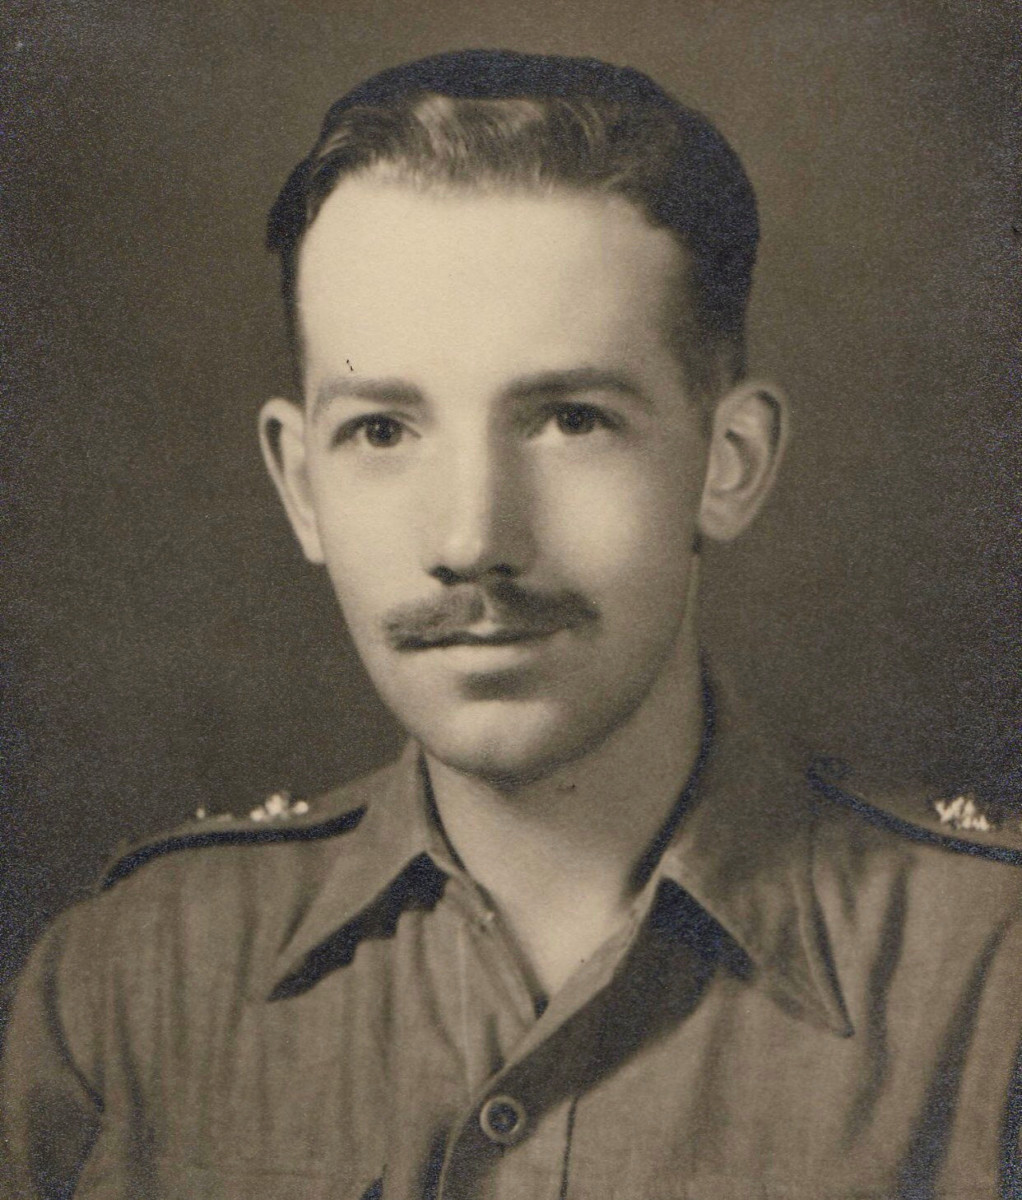 Captain Tom enlisted in 145 Regiment Royal Armoured Corps at the start of WWII